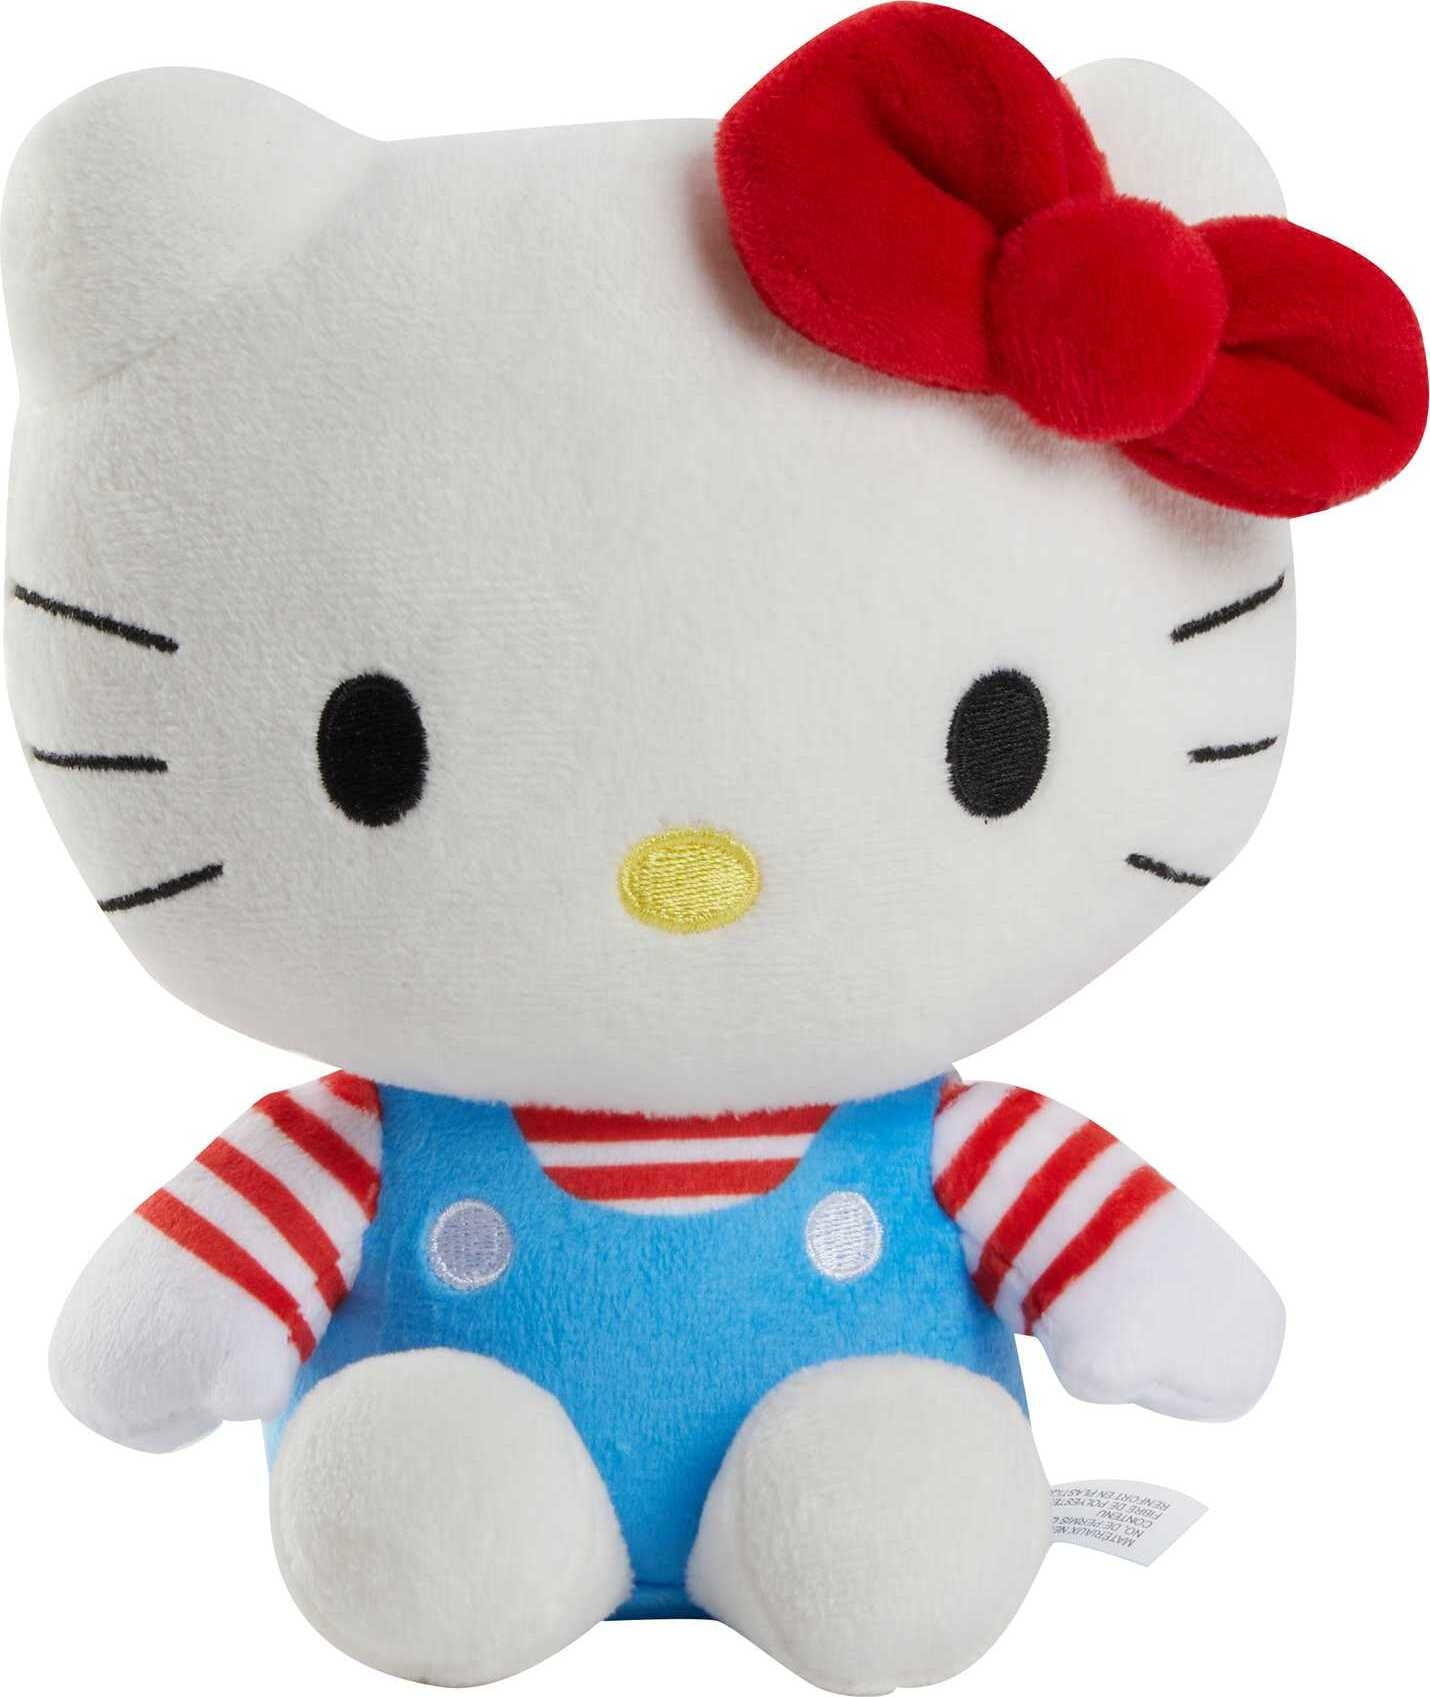 Sanrio Hello Kitty Soft Toch Plush Doll 7.6 inches Japan Import with Kanji  Love Sticker Original Package